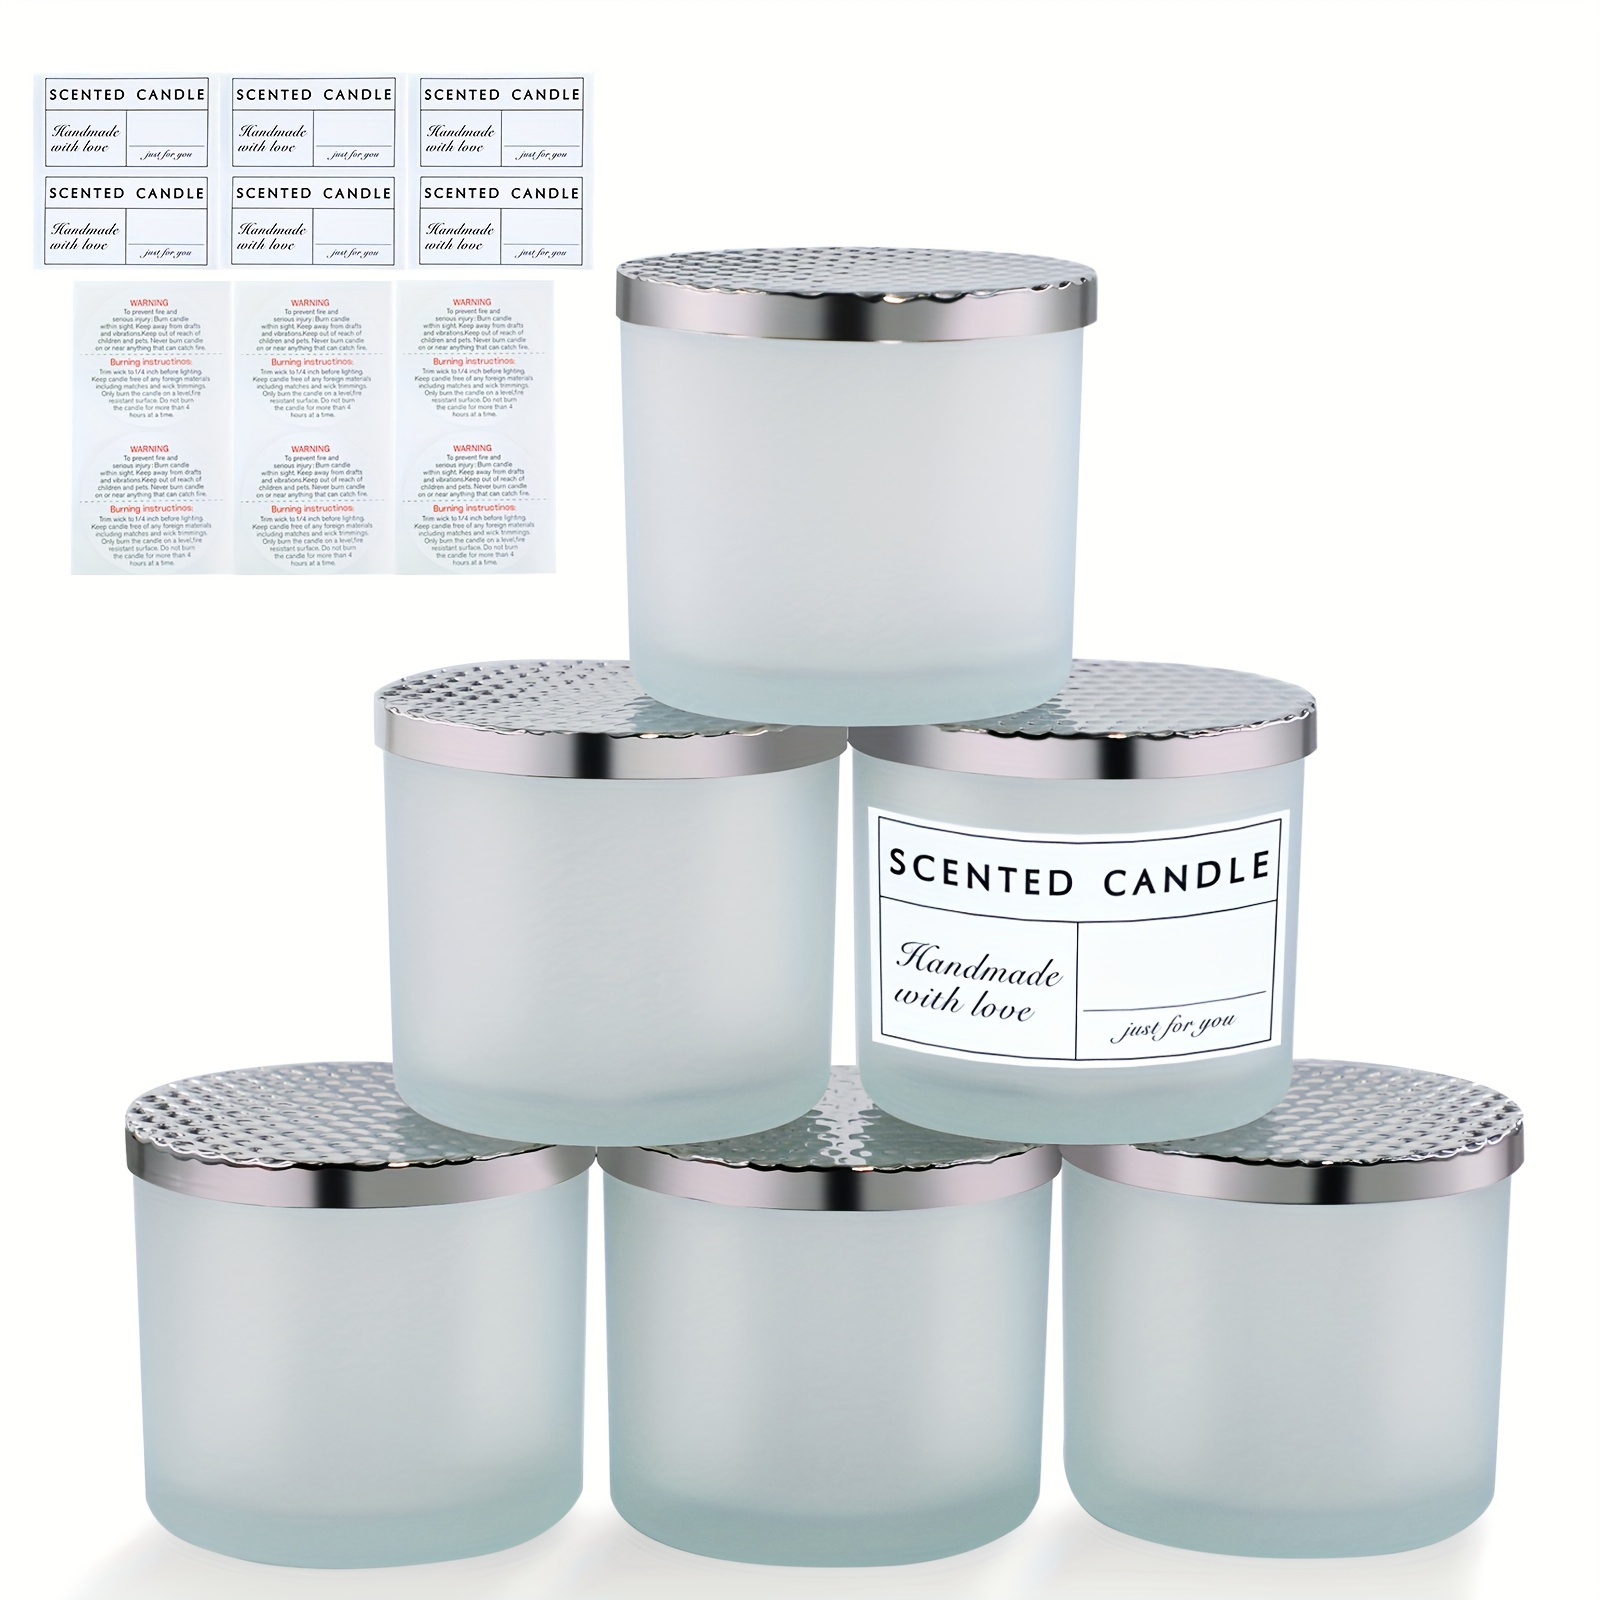 

13 Oz Candle Jars, 6 Pack 3 Wick Candle Jars For Making Candles, Empty Glass Candle Jar With Metal Lids And Sticky Labels, Frosted White Candle Containers - Dishwasher Safe